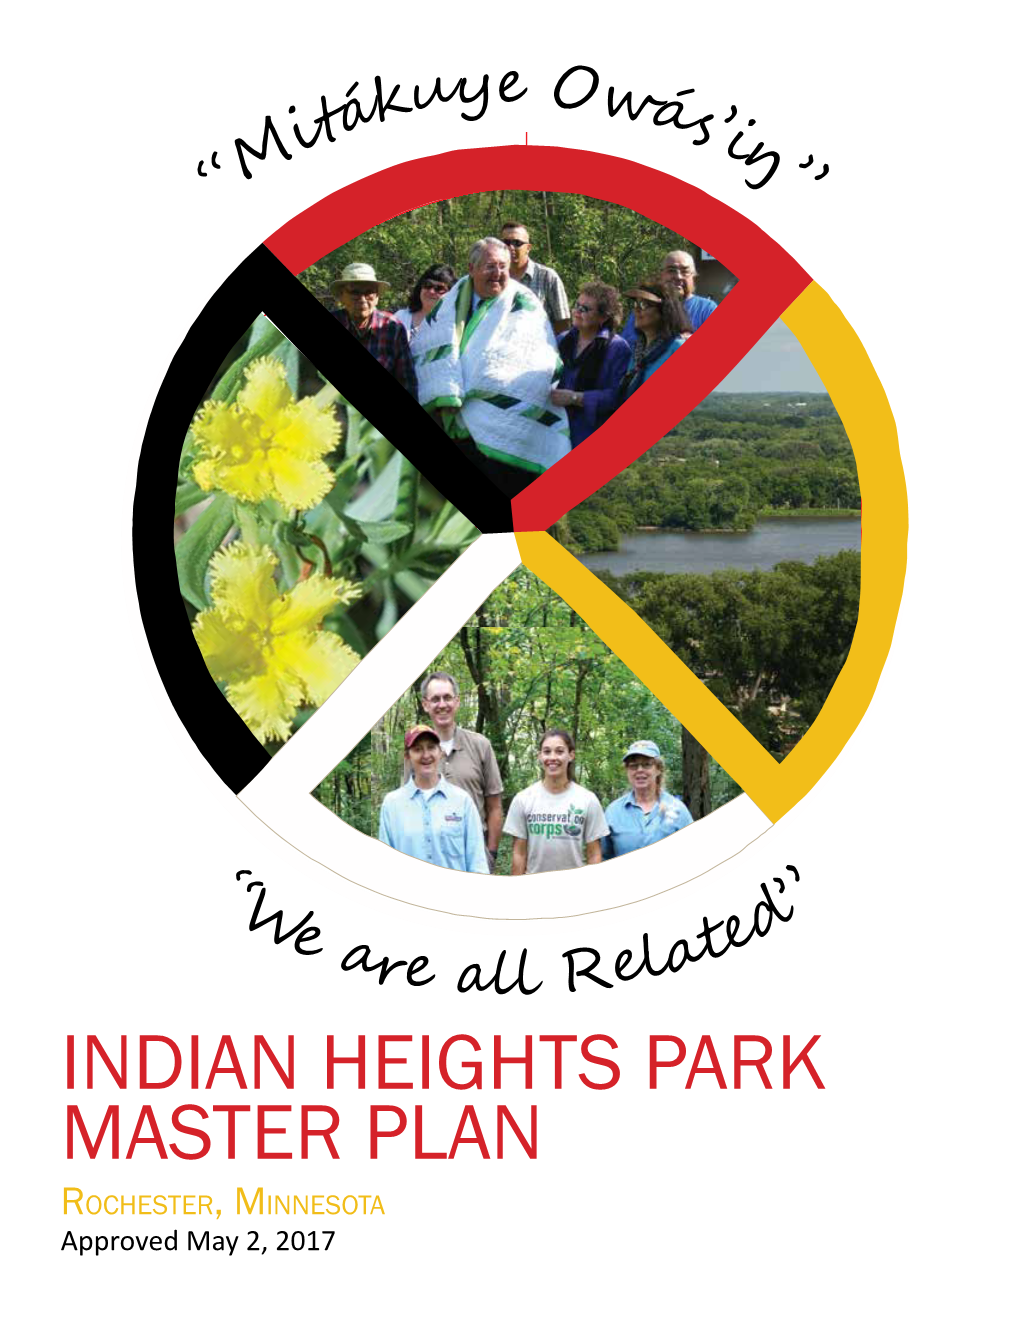 INDIAN HEIGHTS PARK MASTER PLAN ROCHESTER, MINNESOTA Approved May 2, 2017 ACKNOWLEDGMENTS